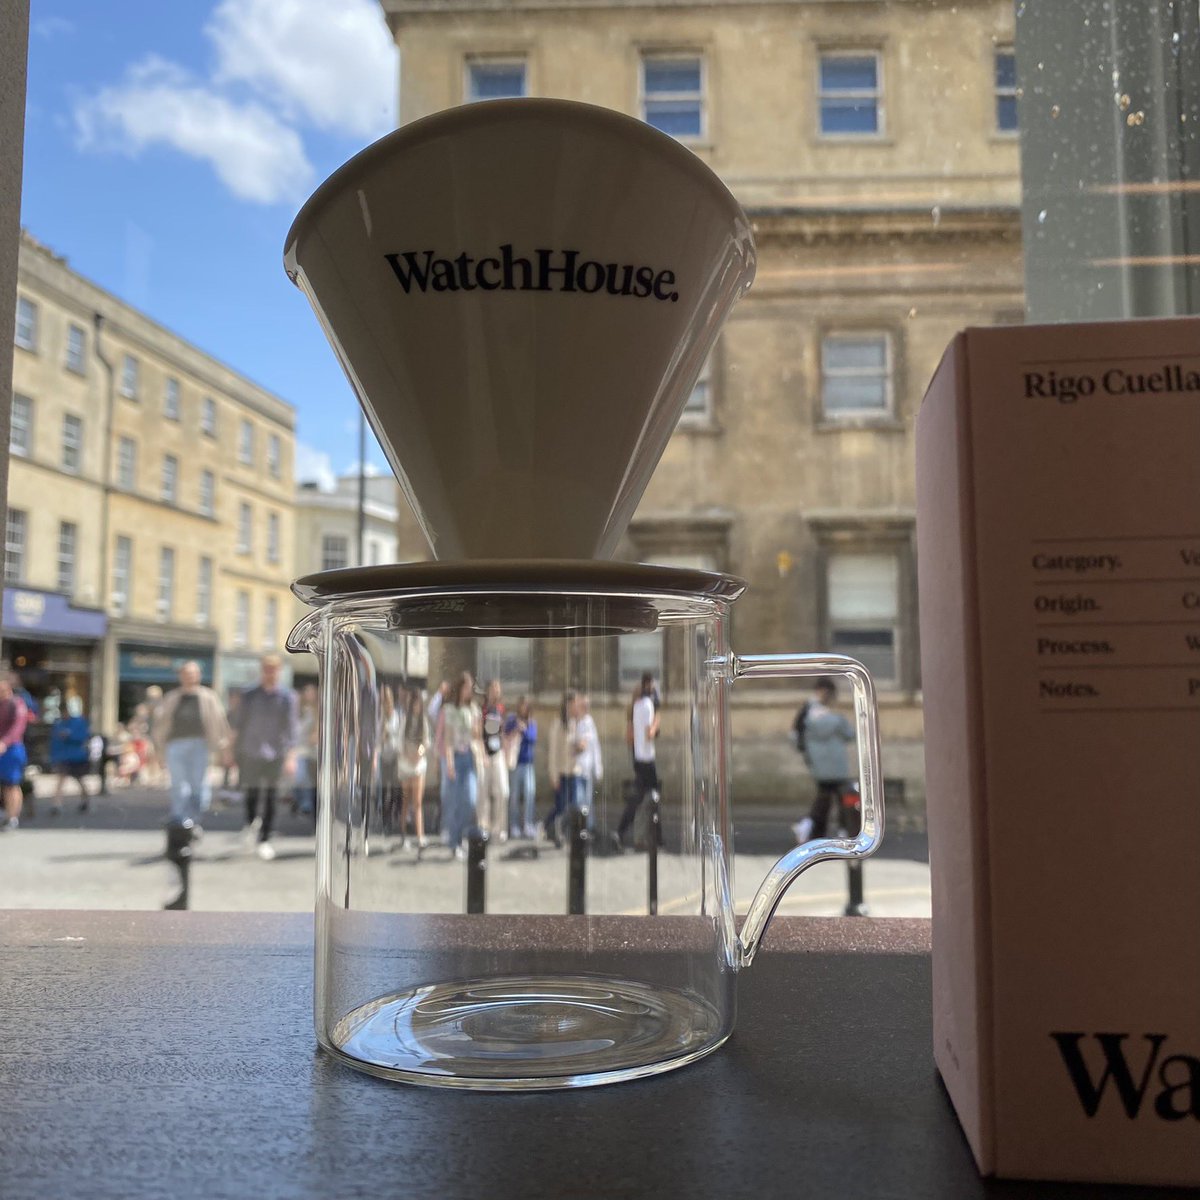 🕰️☕️ @watchhouse_uk has opened 12 cafés across the UK, and most recently one right here in our beautiful city of Bath. Thanks to Poppy Murphy for snapping these fab photos! 📸